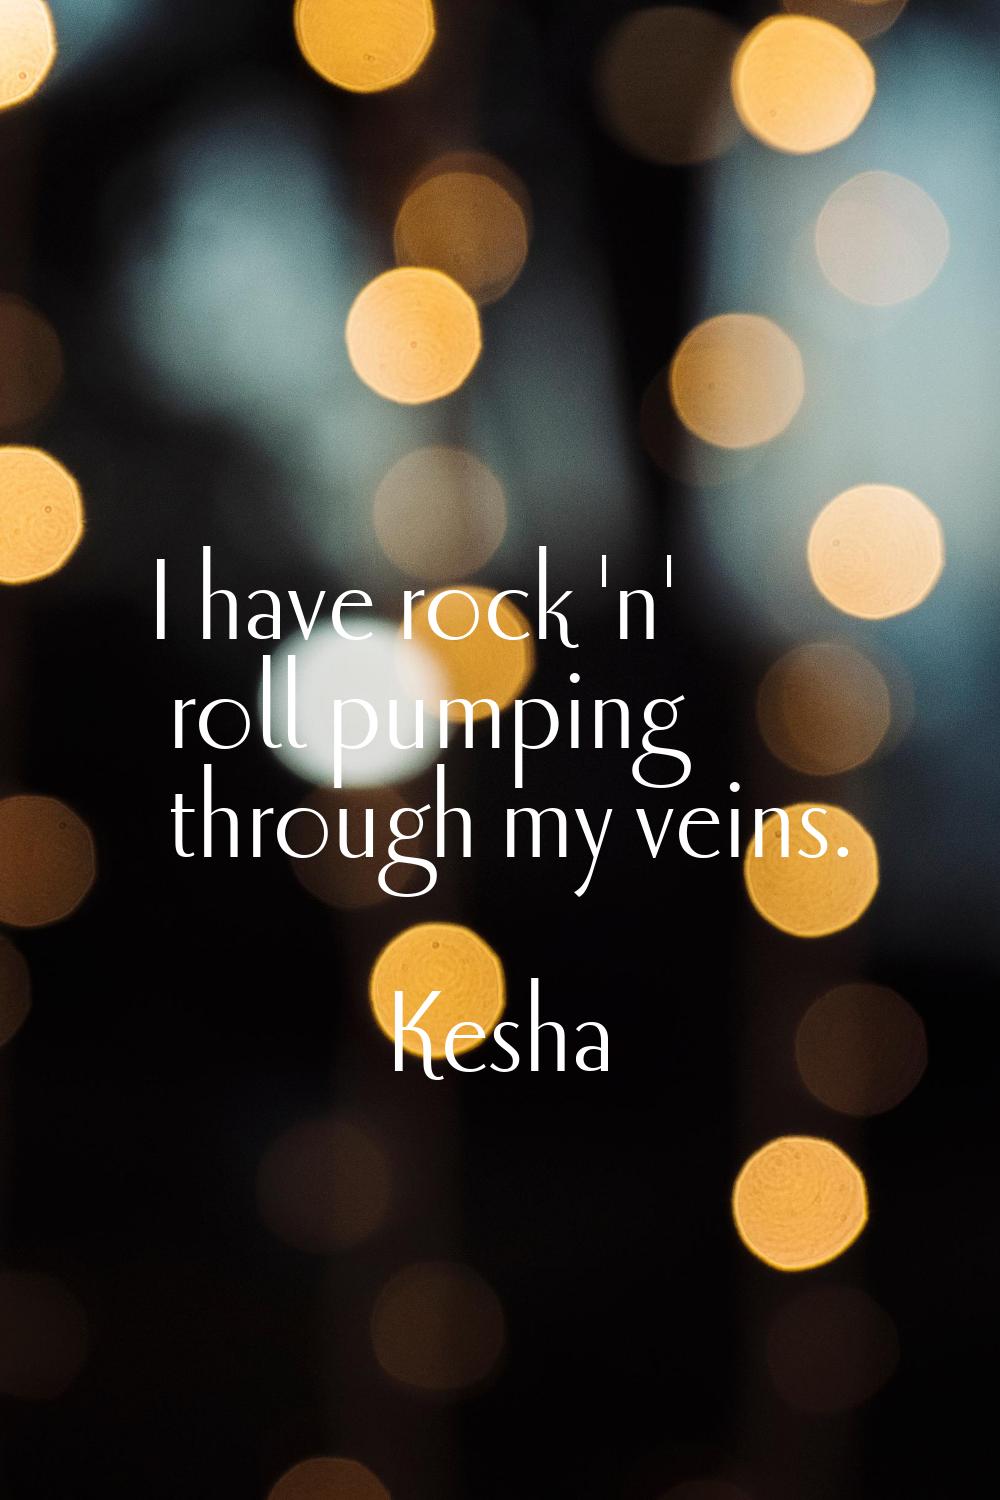 I have rock 'n' roll pumping through my veins.